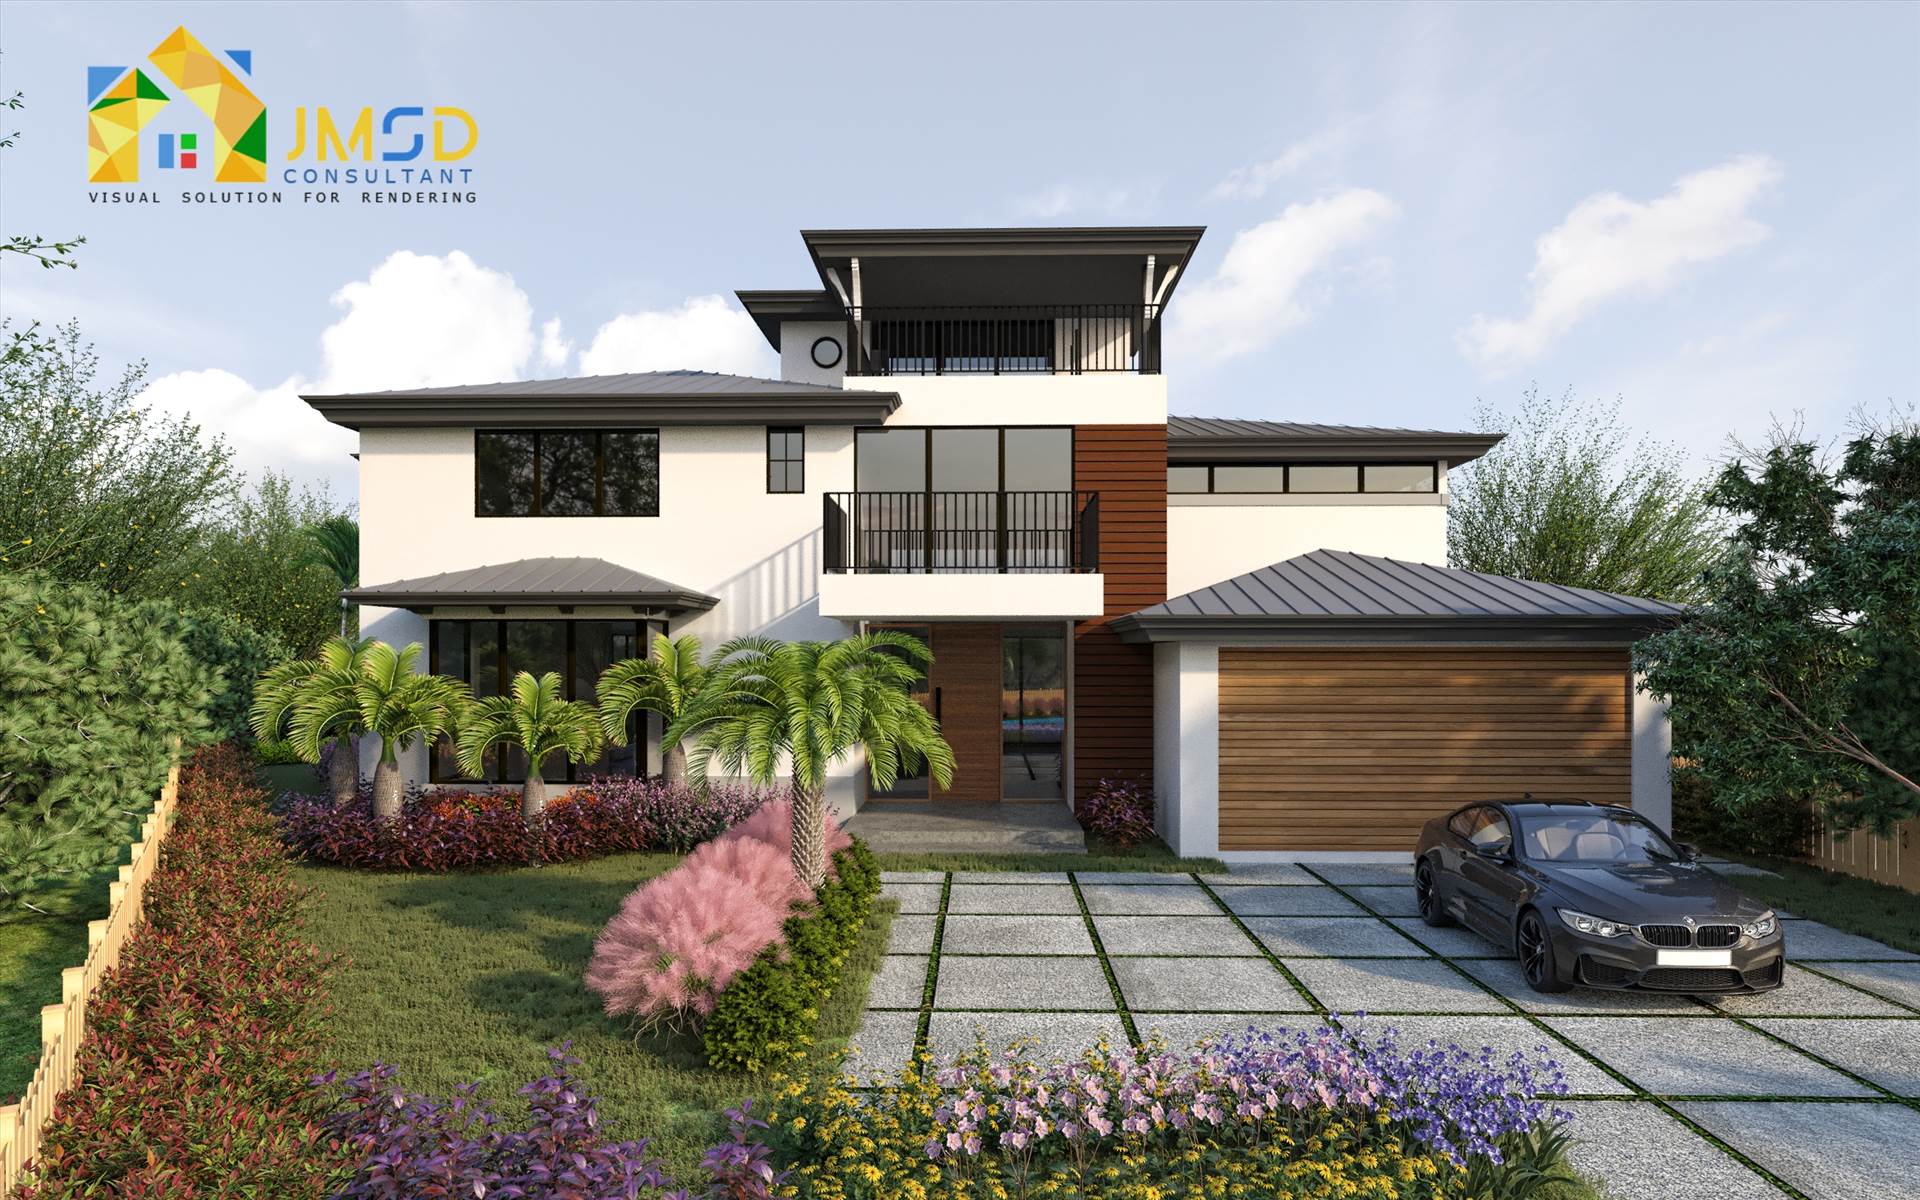 3D Exterior Home Rendering in St. Petersburg Florida Request eye-catching 3D Rendering Services St. Petersburg Florida to grab client’s attention and show how great is your proposal. by JMSDCONSULTANT